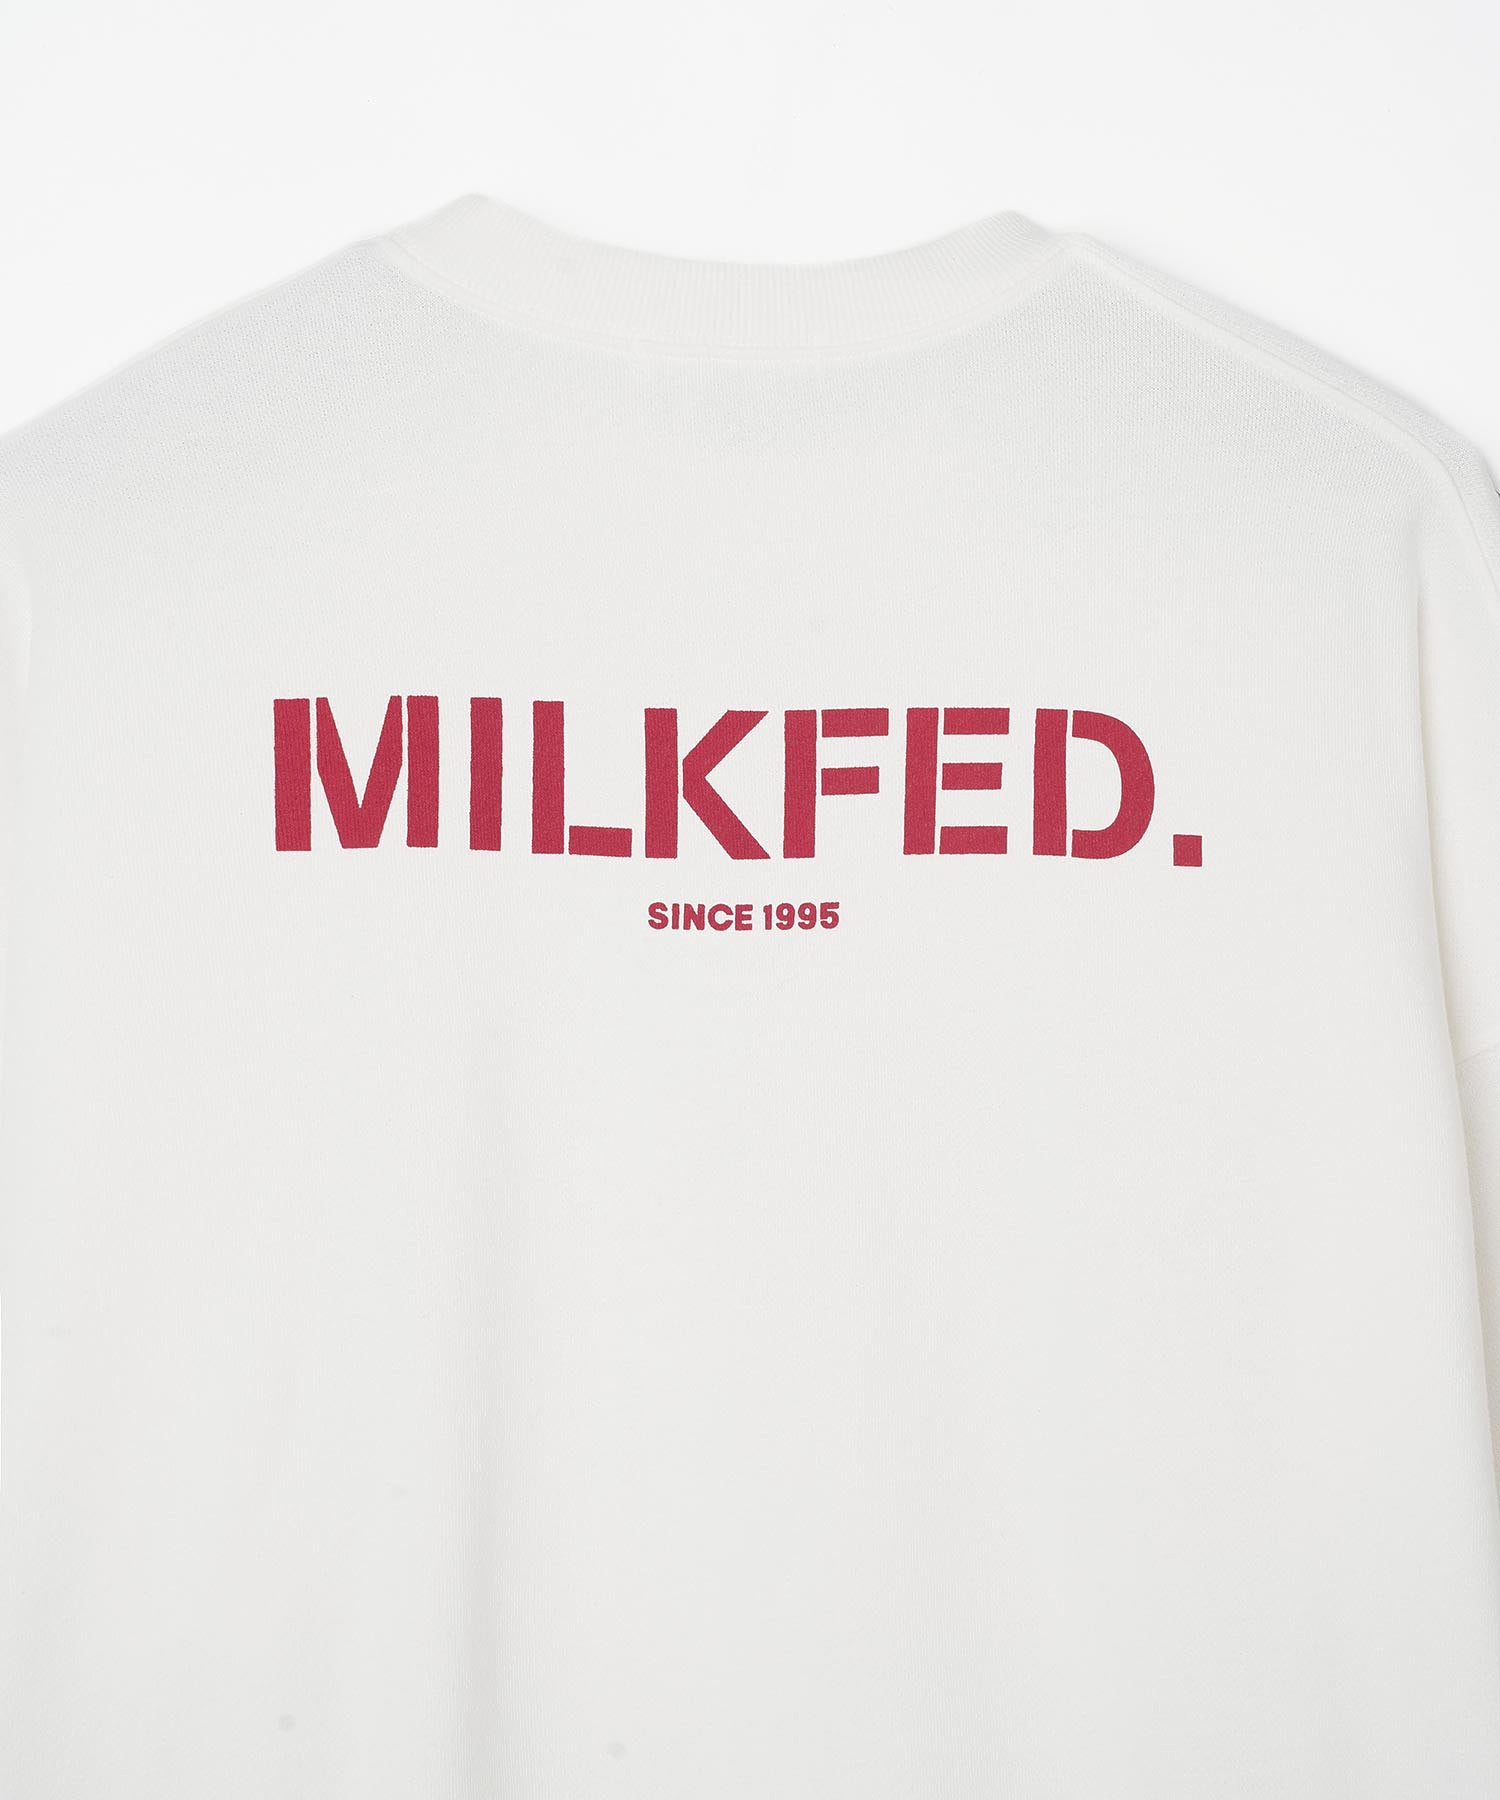 MICKEY AND FRIENDS/LETS CELEBRATE/SWEAT TOP MILKFED.